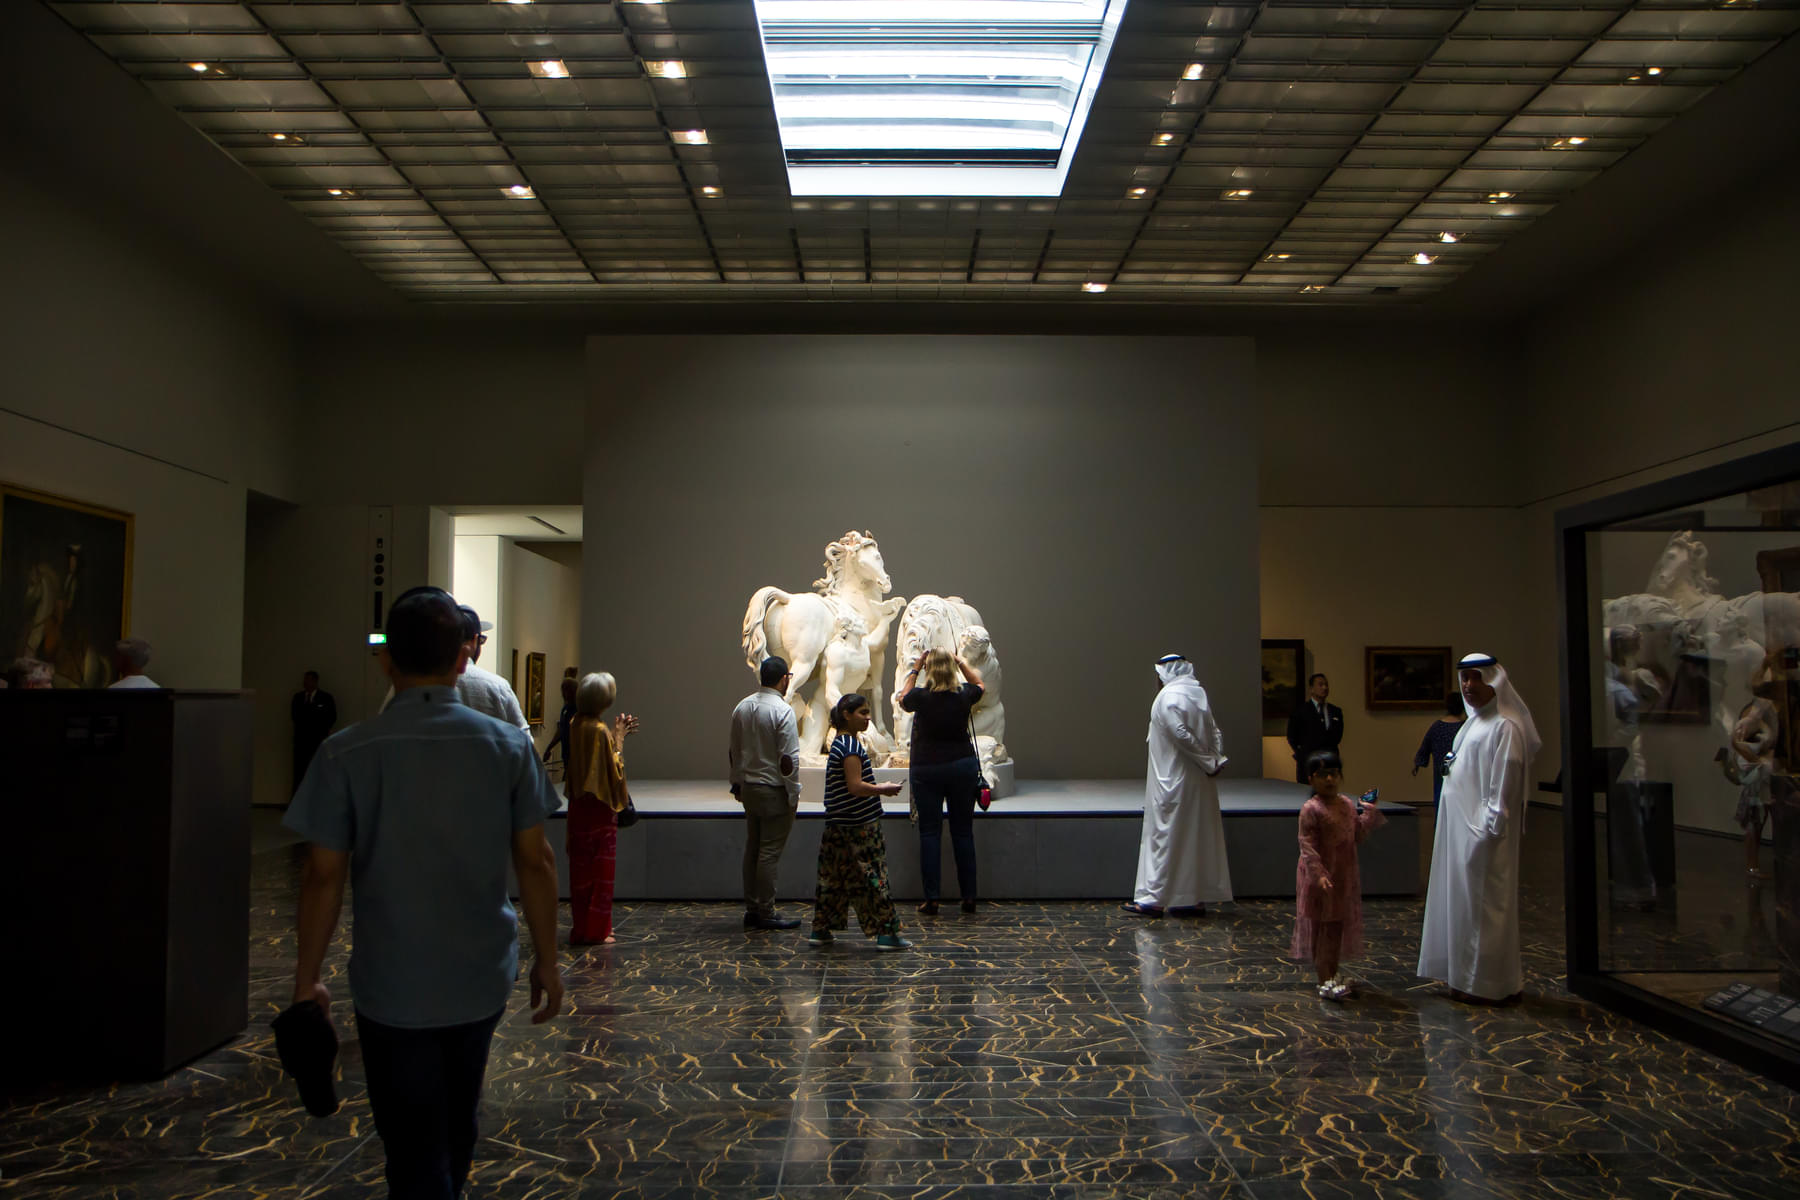 Learn about the historical significance of extraordinary sculptures from expert guides